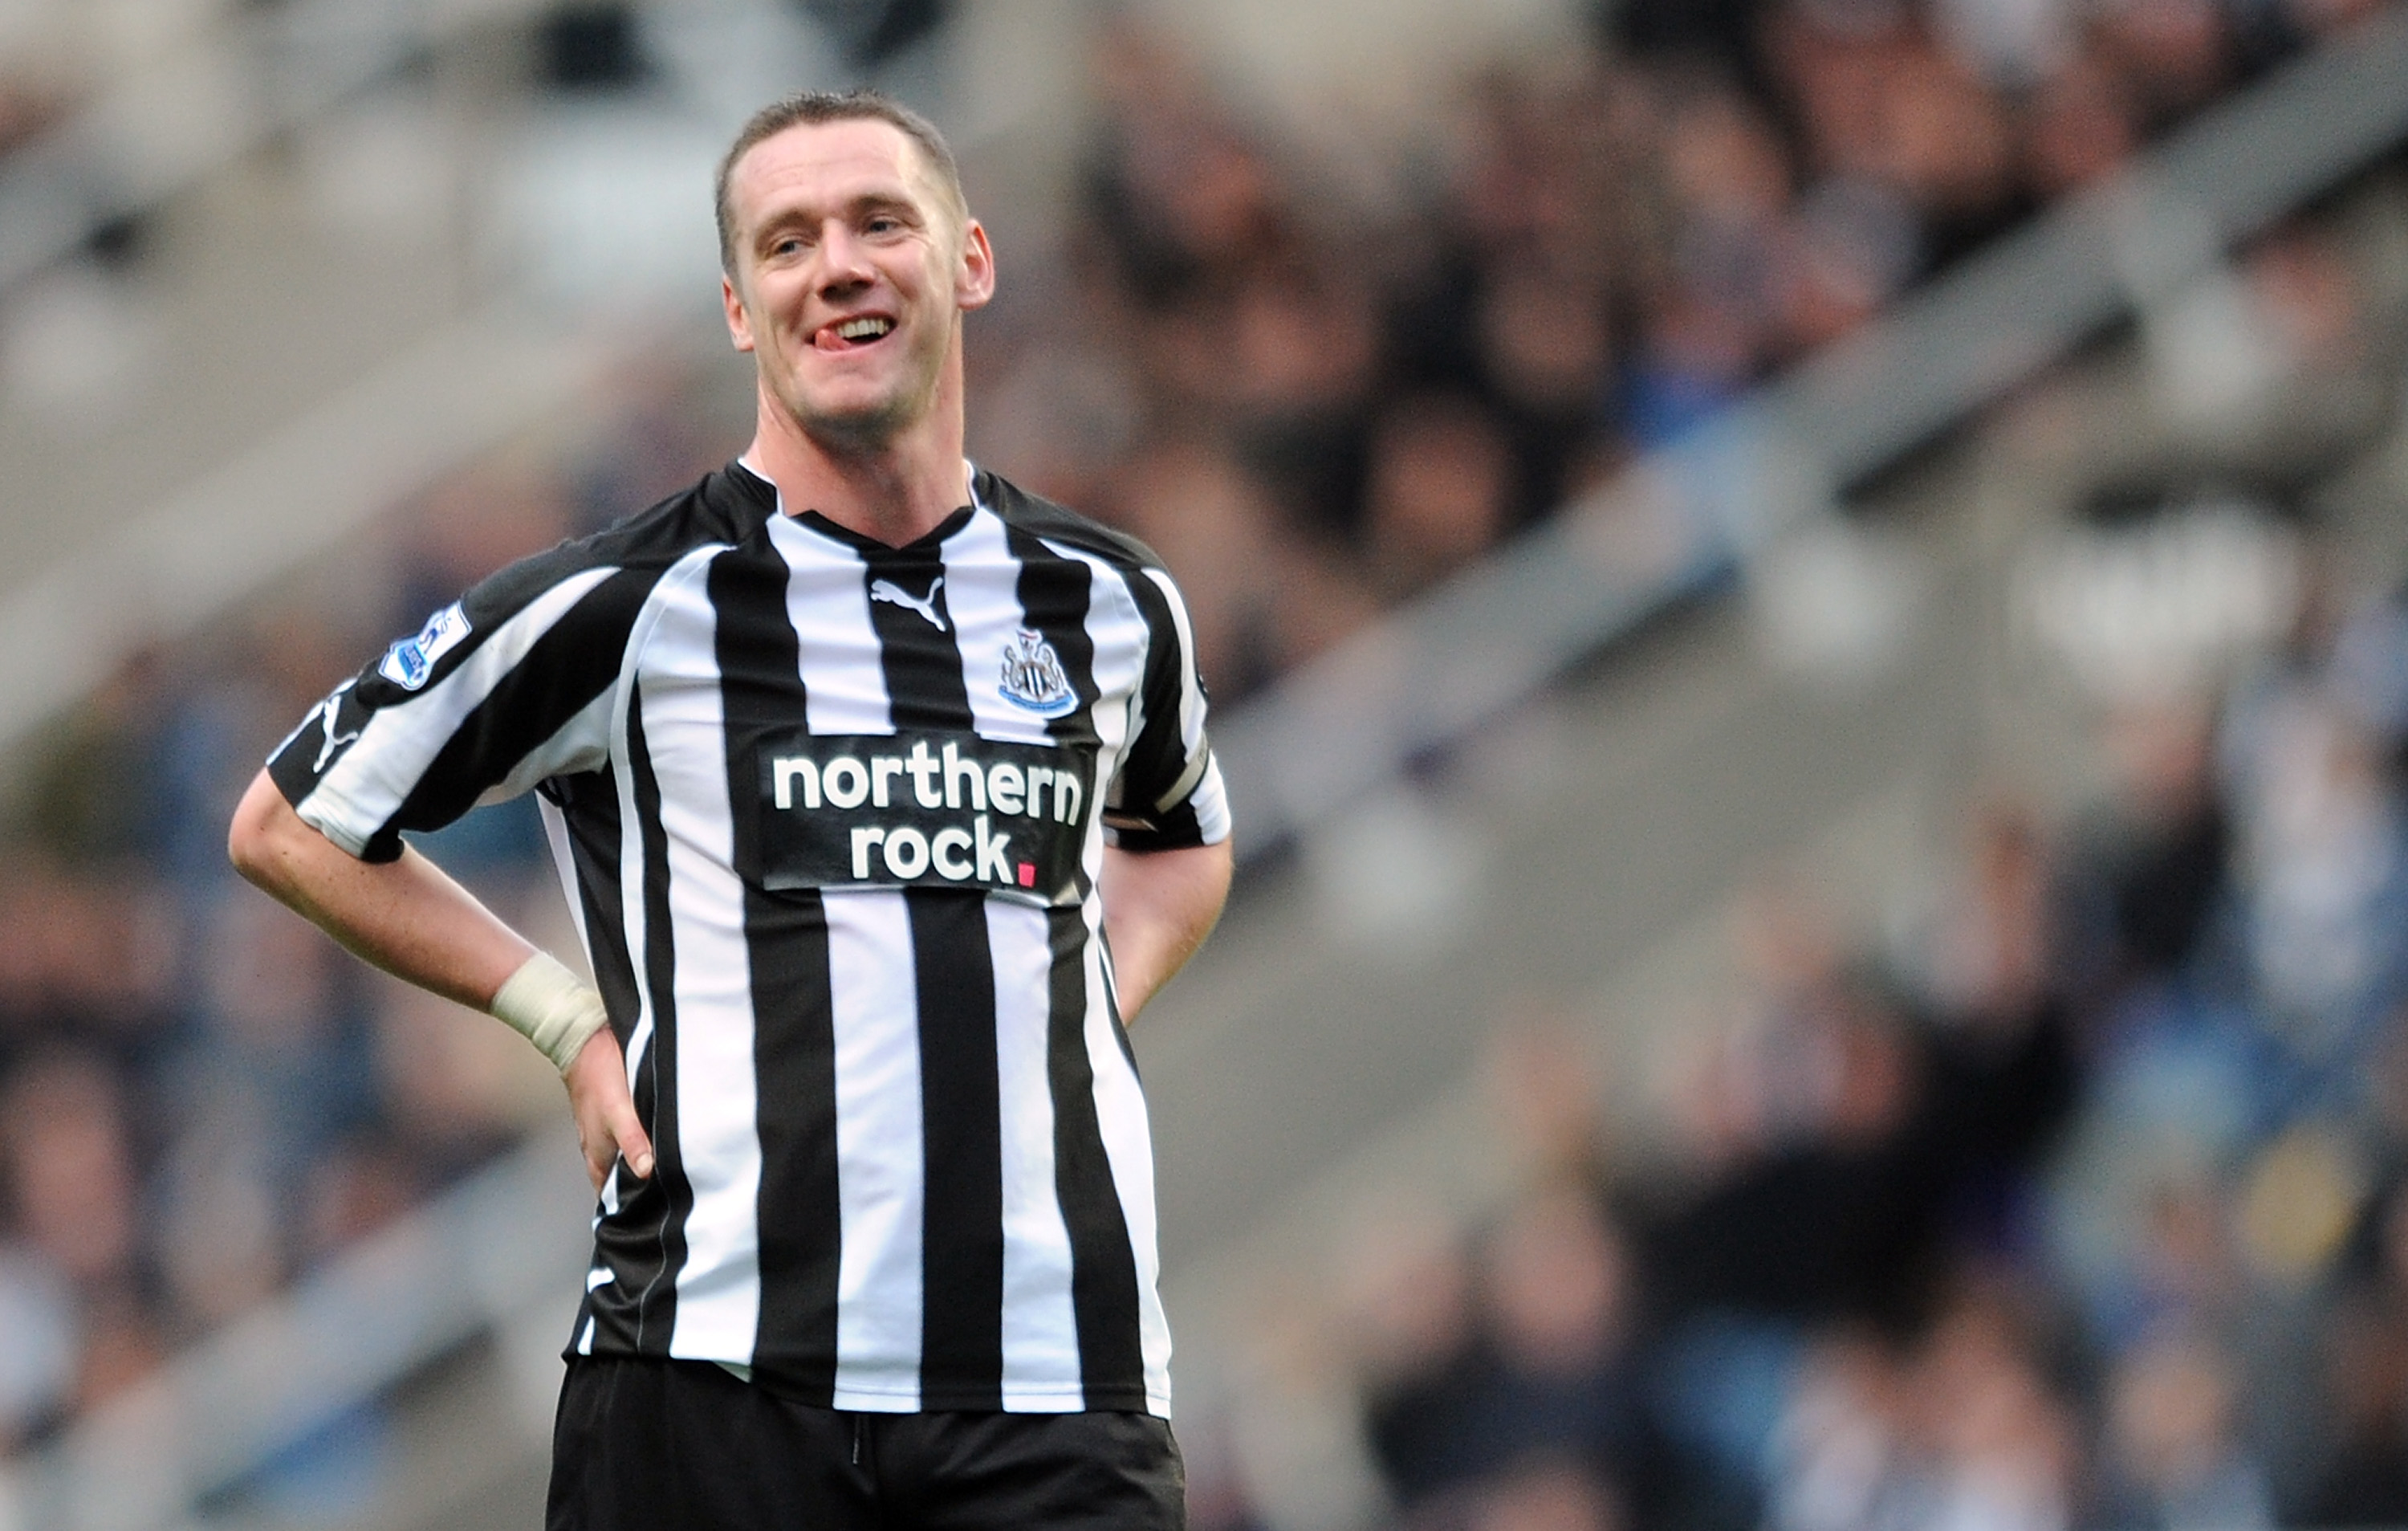 NEWCASTLE UPON TYNE, ENGLAND - FEBRUARY 26:  Kevin Nolan of Newcastle United reacts during the Barclays Premier League match between Newcastle United and Bolton Wanderers at St James' Park on February 26, 2011 in Newcastle upon Tyne, England.  (Photo by C